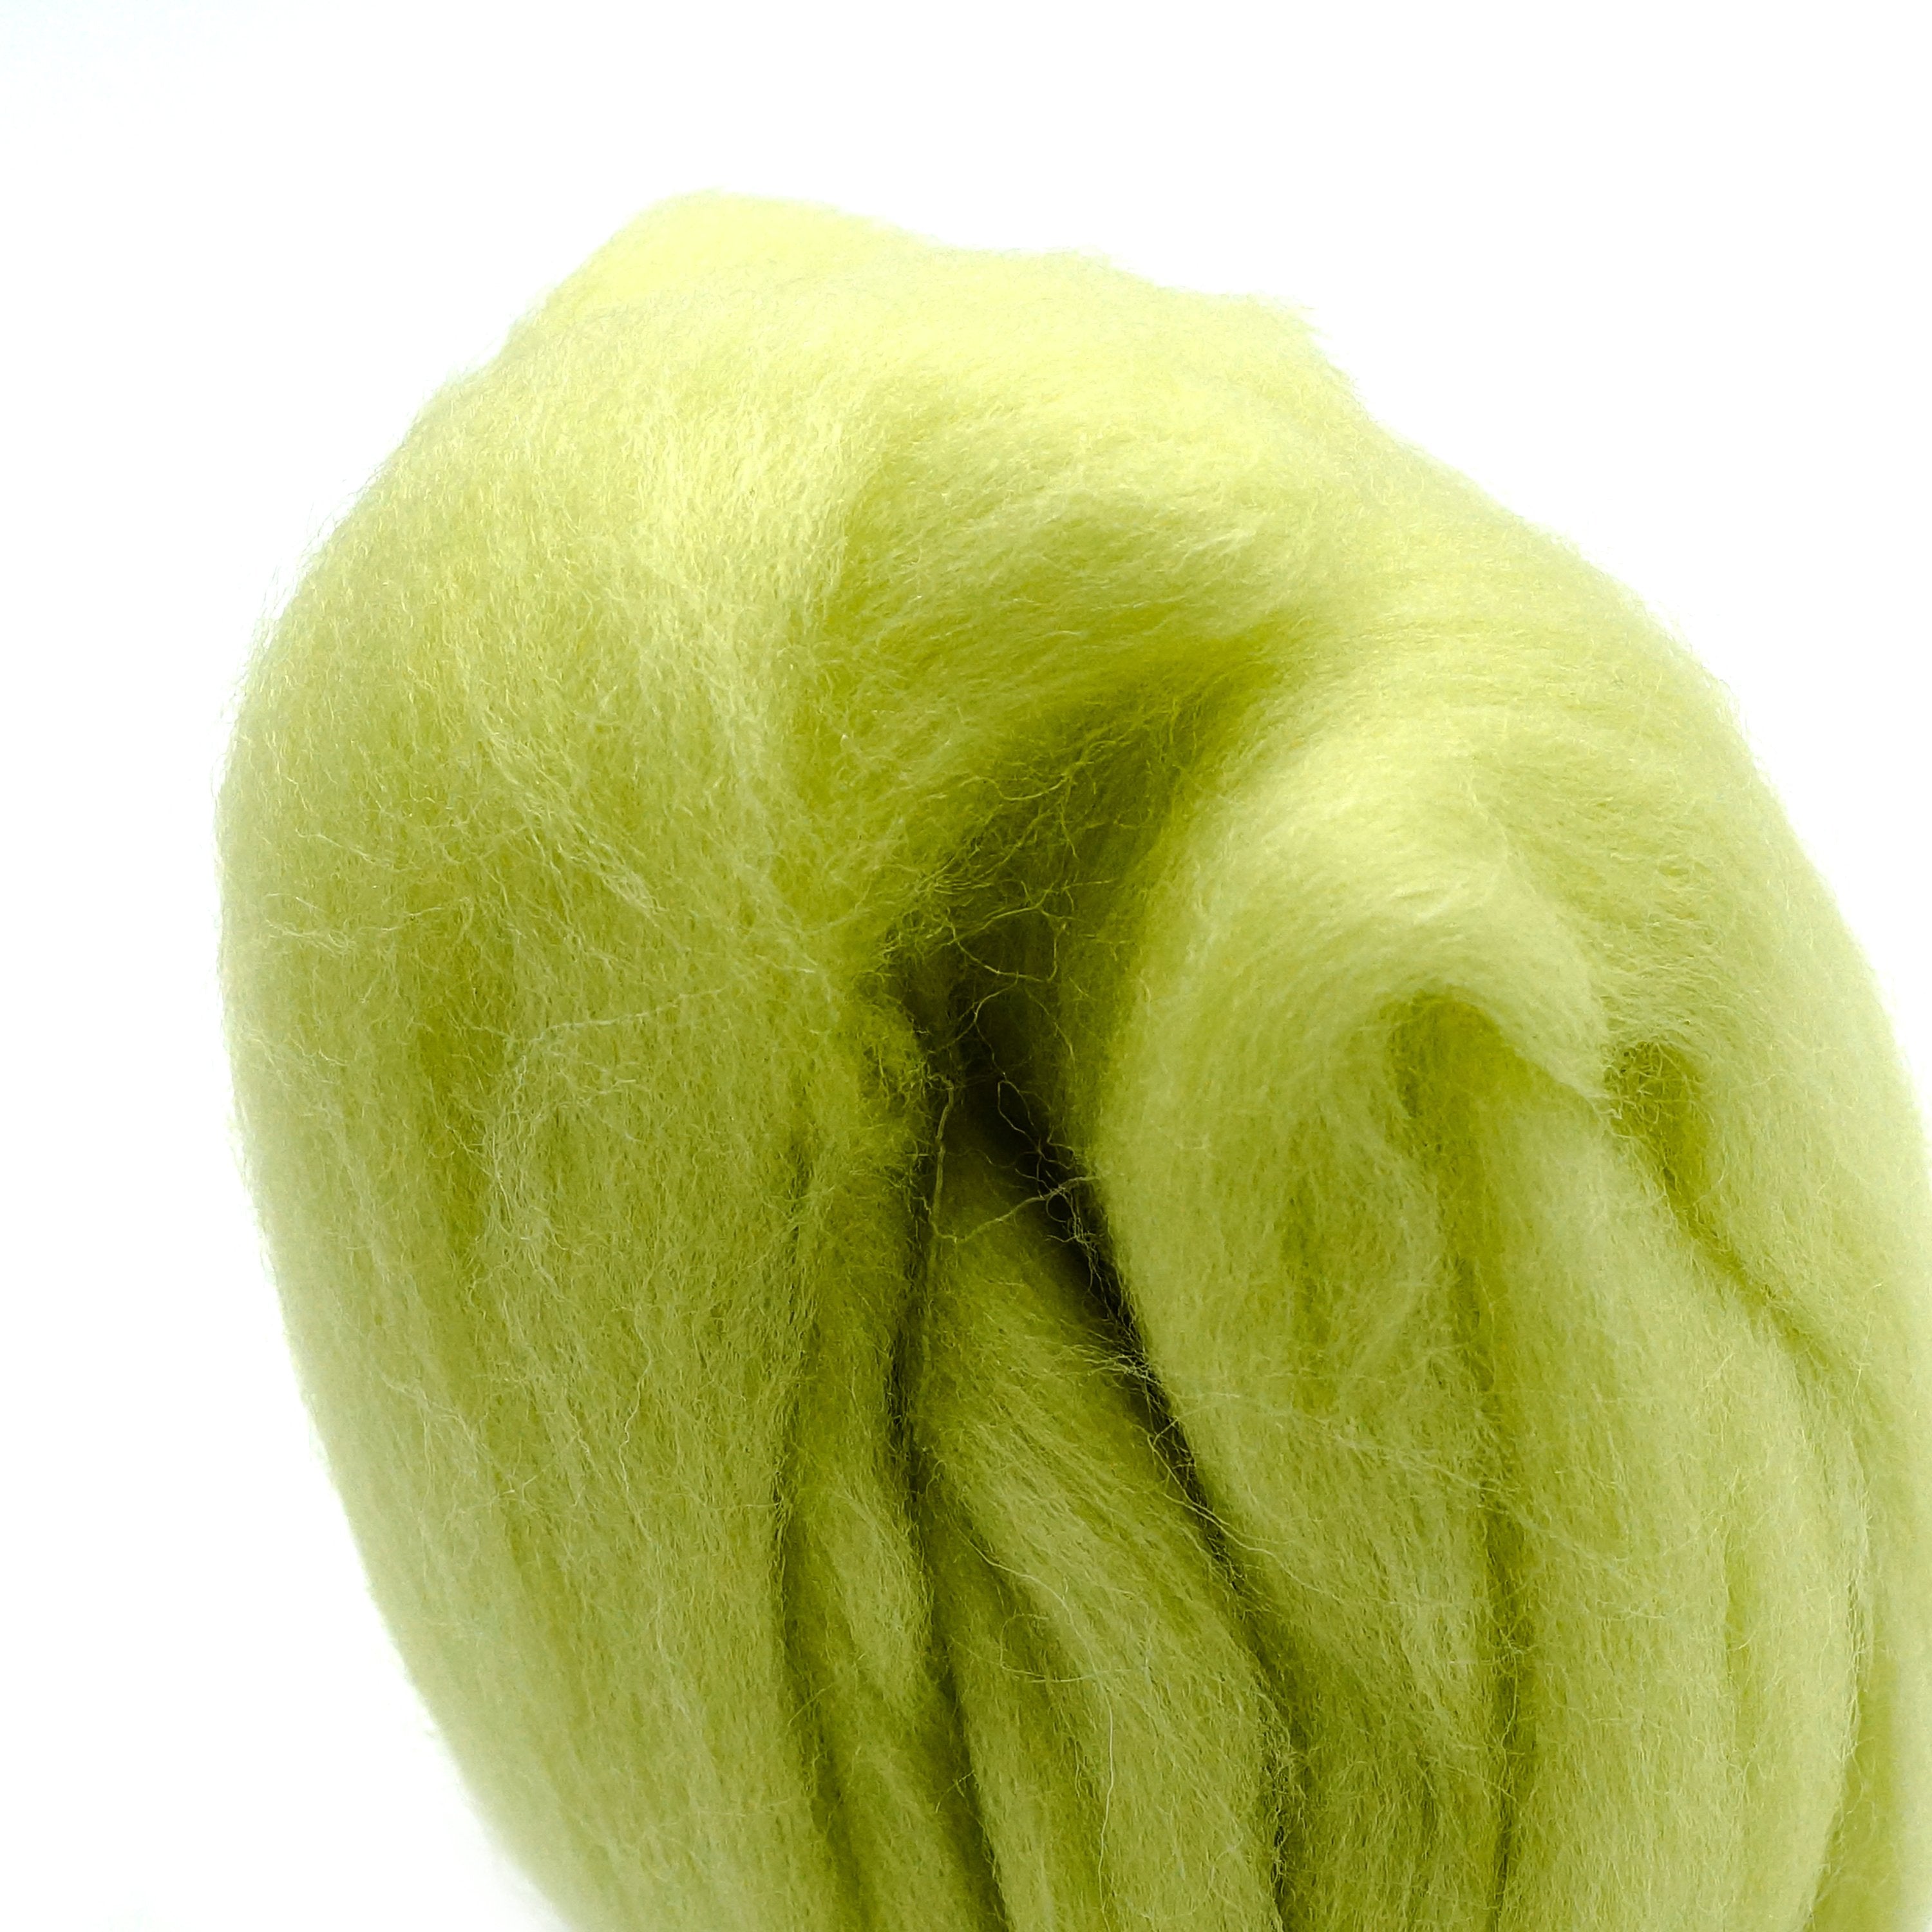 Clover Natural Wool Roving - Lime Green